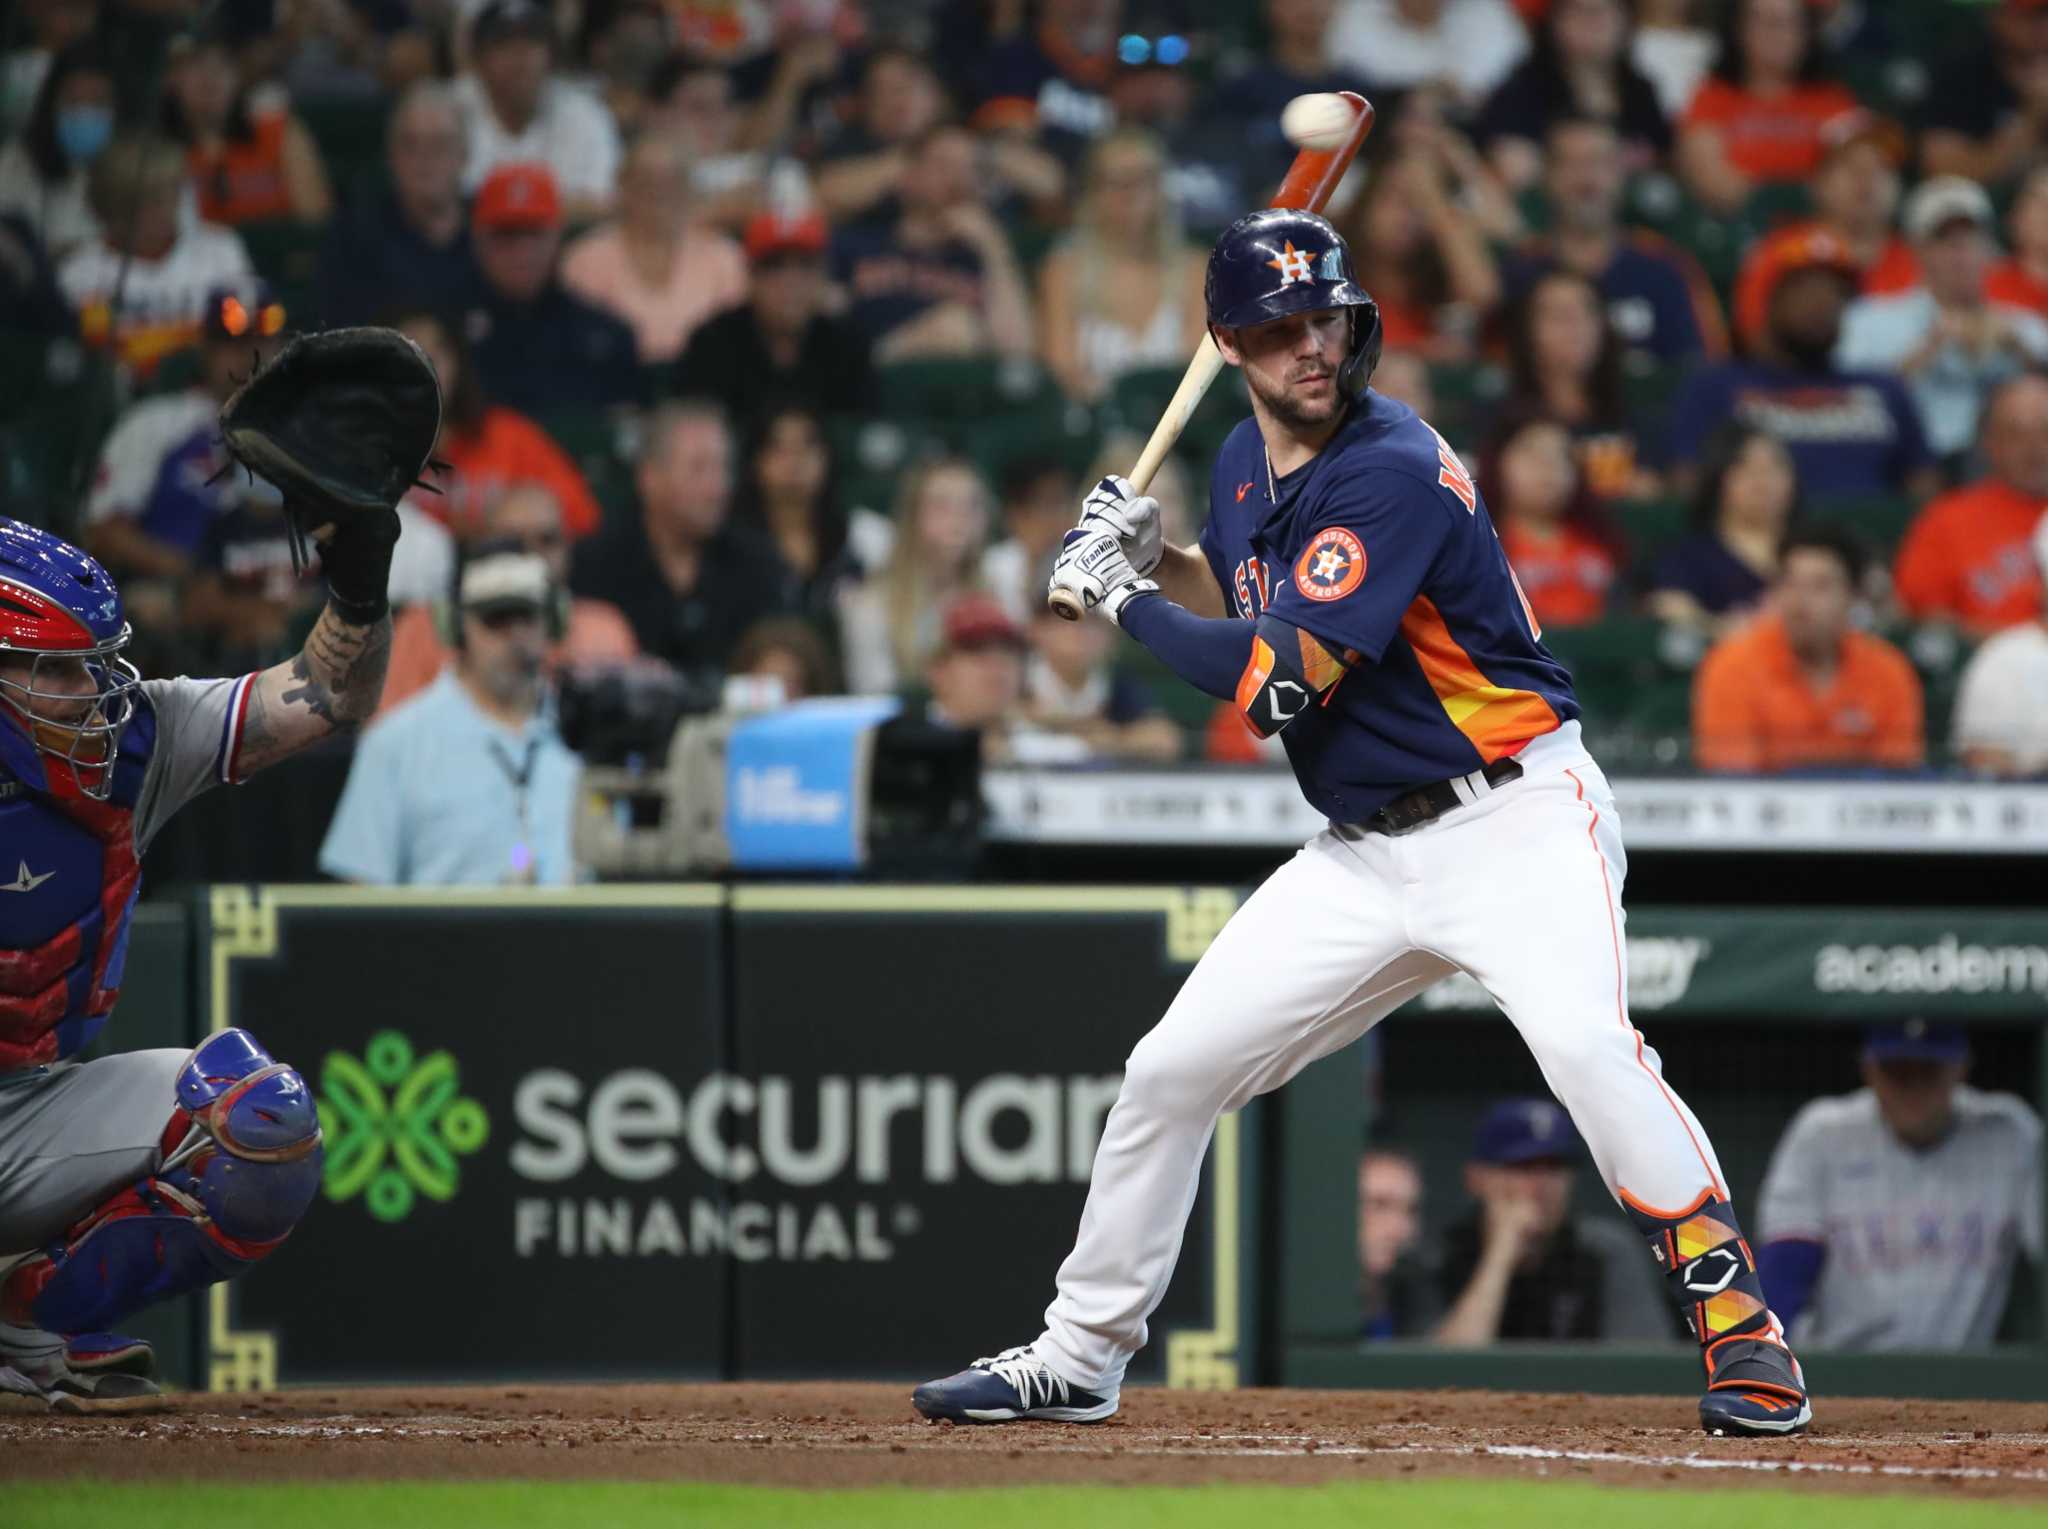 Real Chas: McCormick in CF for Astros, no twin switch here – KXAN